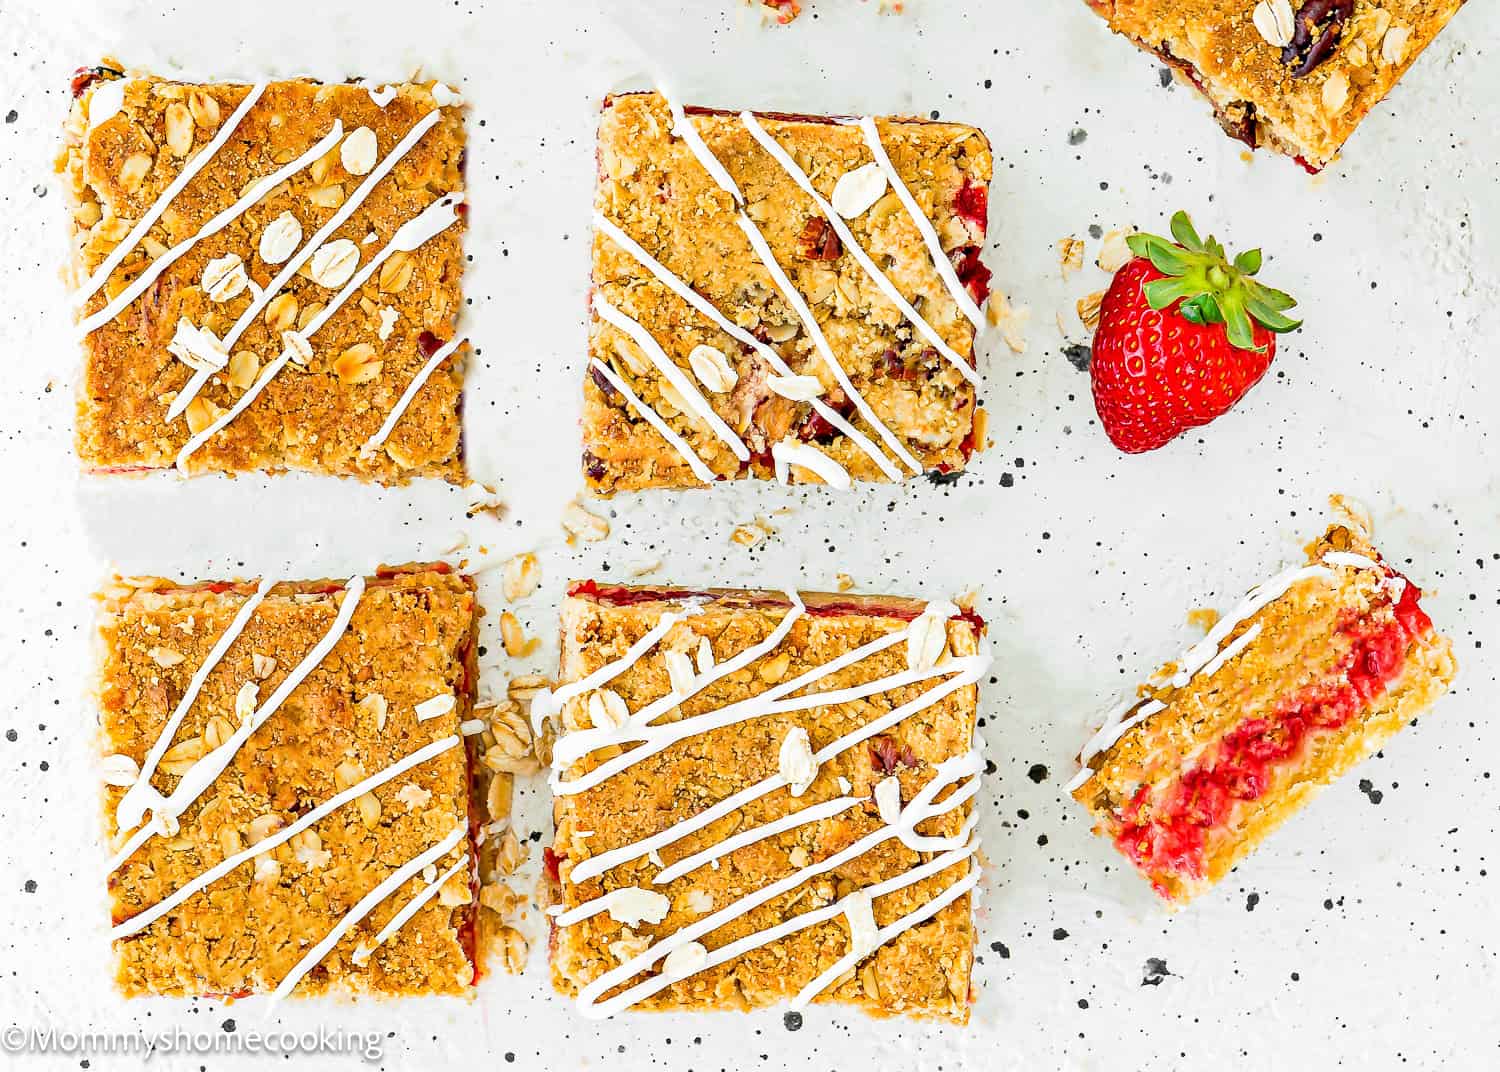 Eggless Strawberry Bars over a white surface with fresh strawberries on the side.